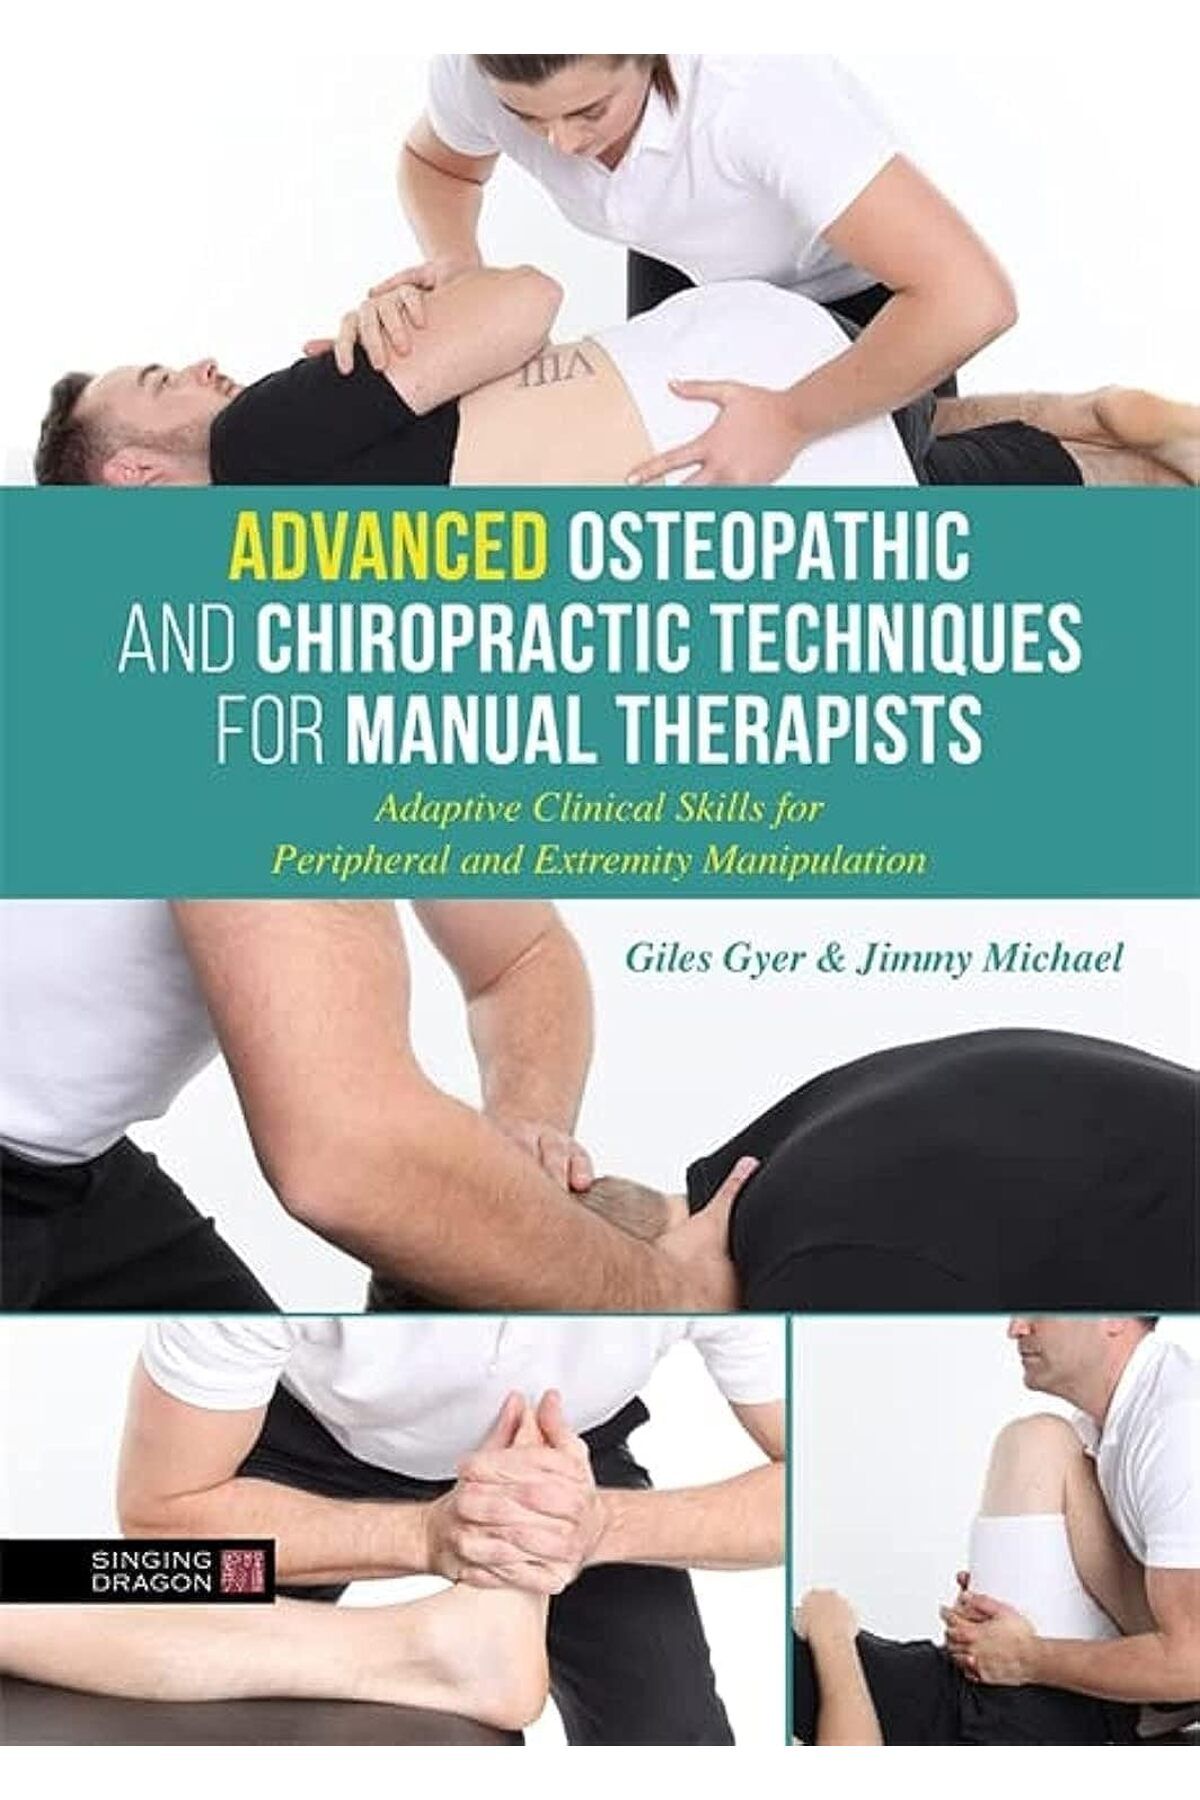 Wiley-Blackwell Advanced Osteopathic and Chiropractic Techniques for Manual Therapists